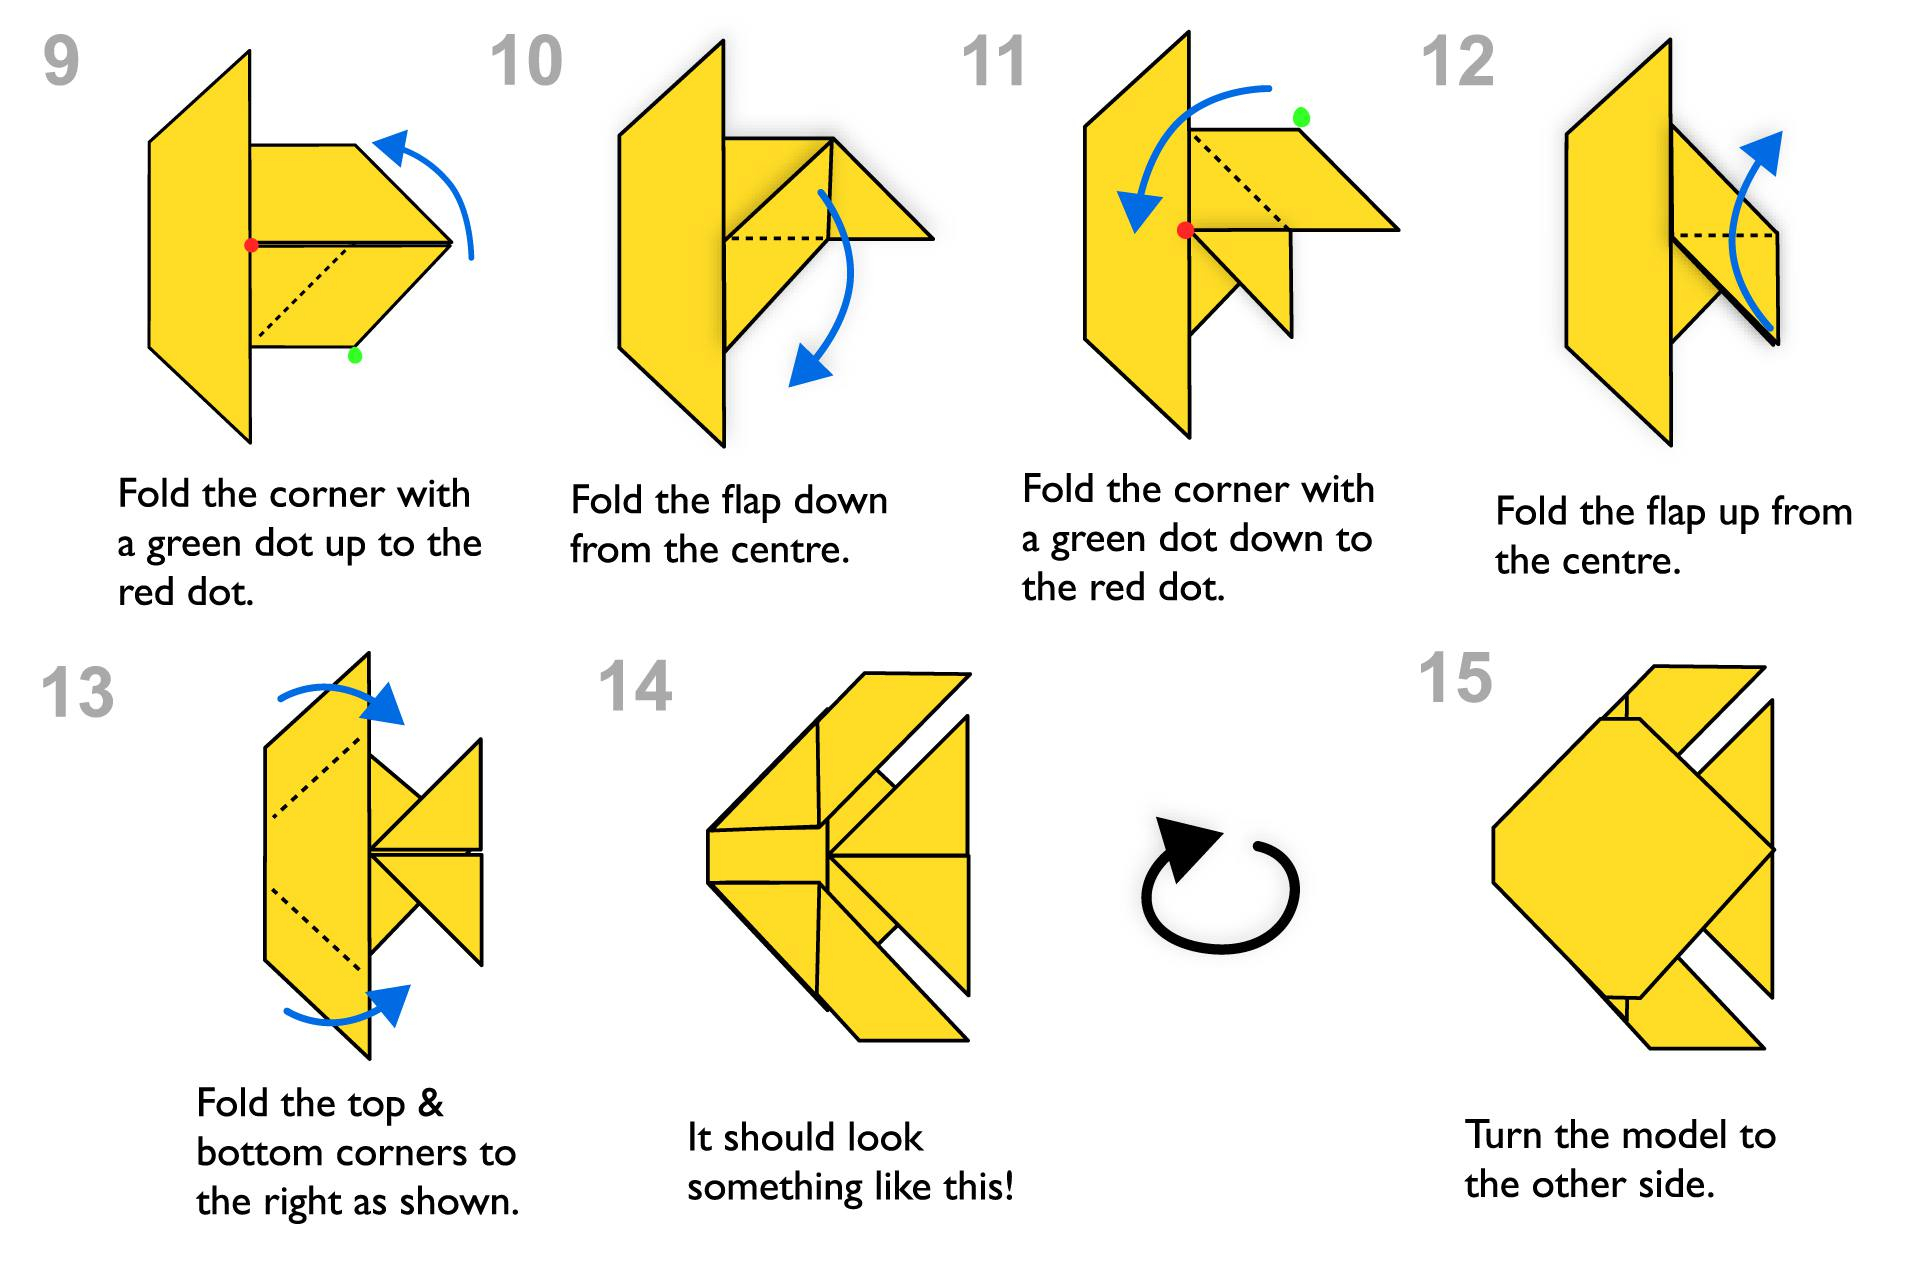 Origami Fish Instructions Step Step Instructions For Making An Origami Fish